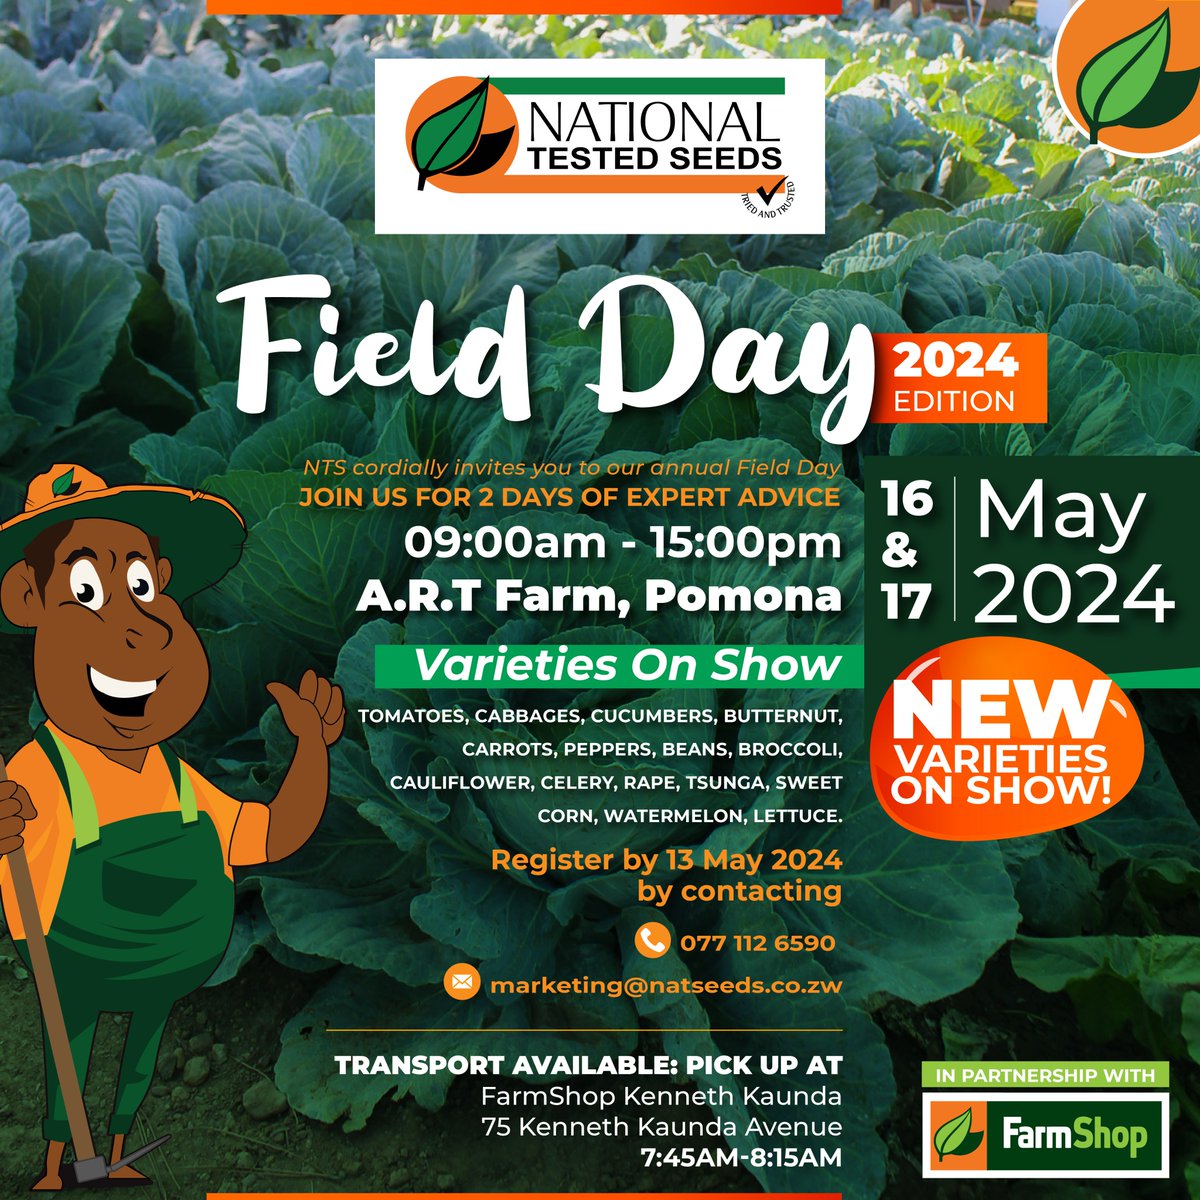 Don't miss out on the National Tested Seeds Field Day happening on May 16th and 17th of May 2024 at A.R.T FARM, Pomona. Explore innovative vegetable varieties & gather priceless tips from our expert agronomists. Register now!

#NTSFieldDay #SeedOfChampions #ShamwariYeHurudza